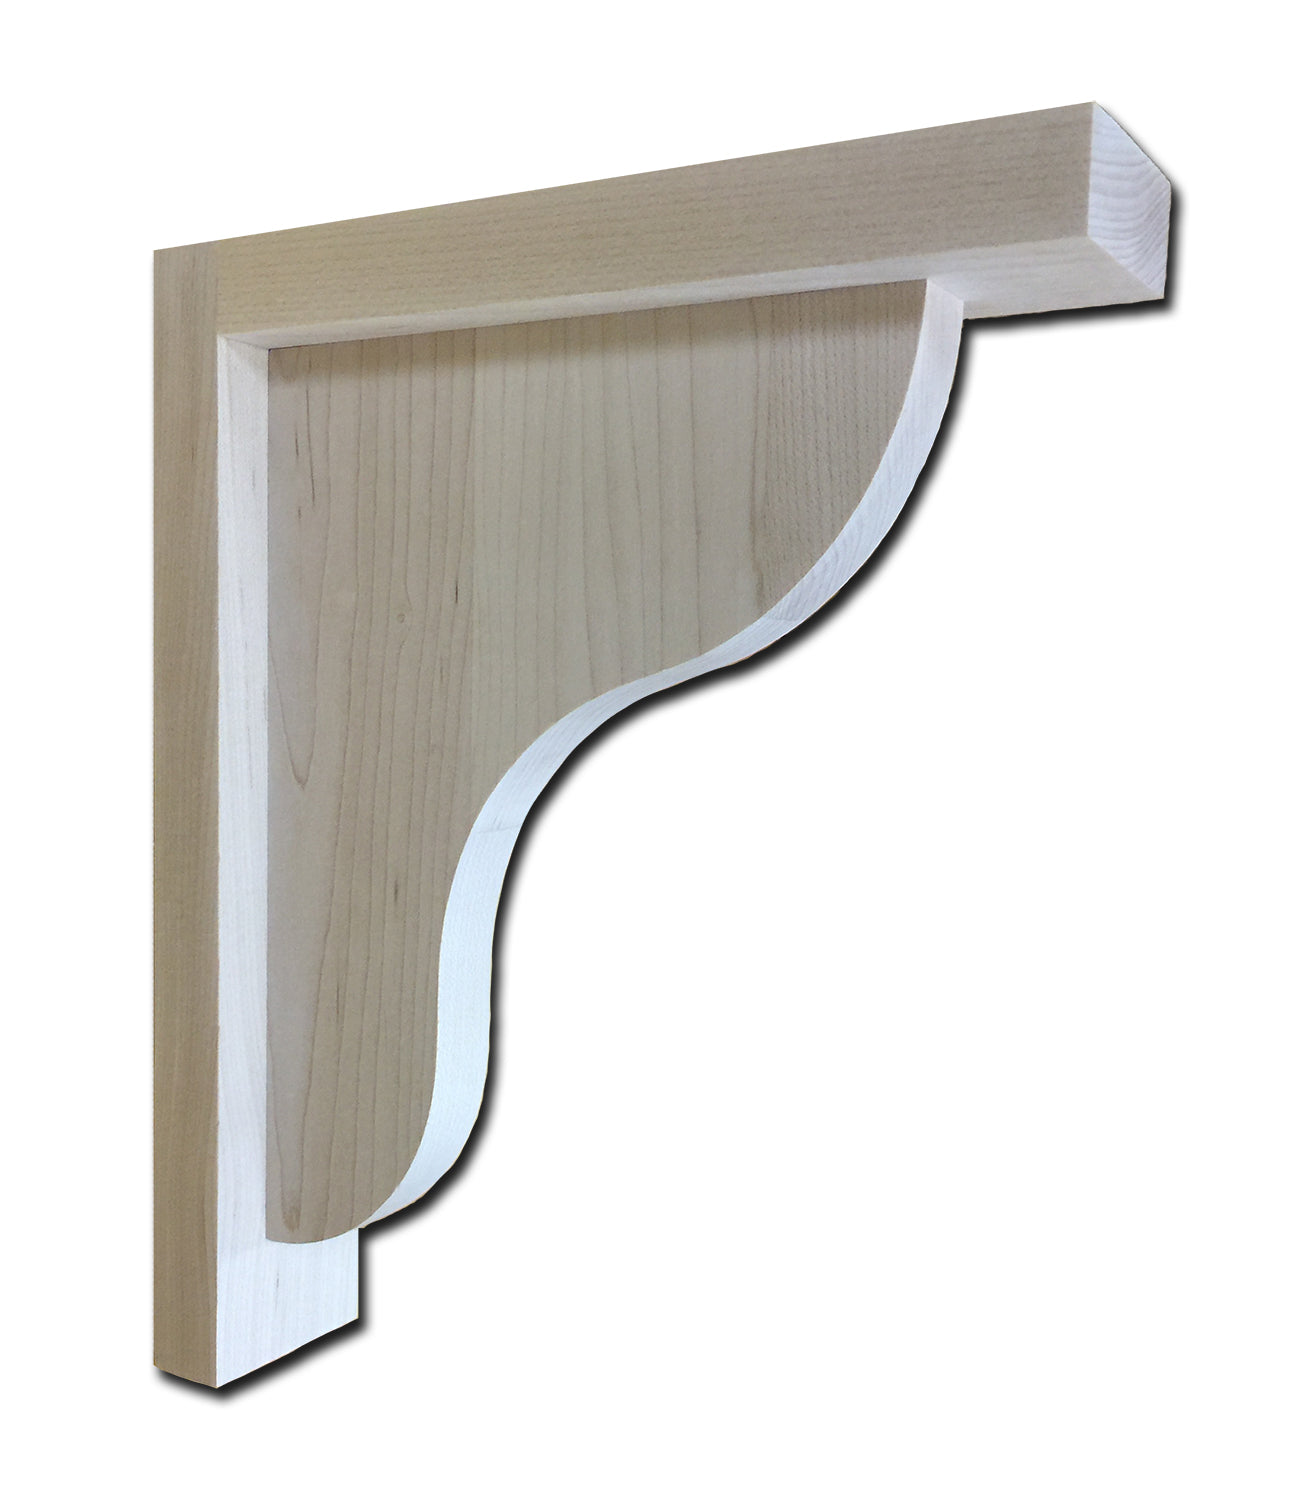 Castlewood SY-CA-BB12 Countertop Support